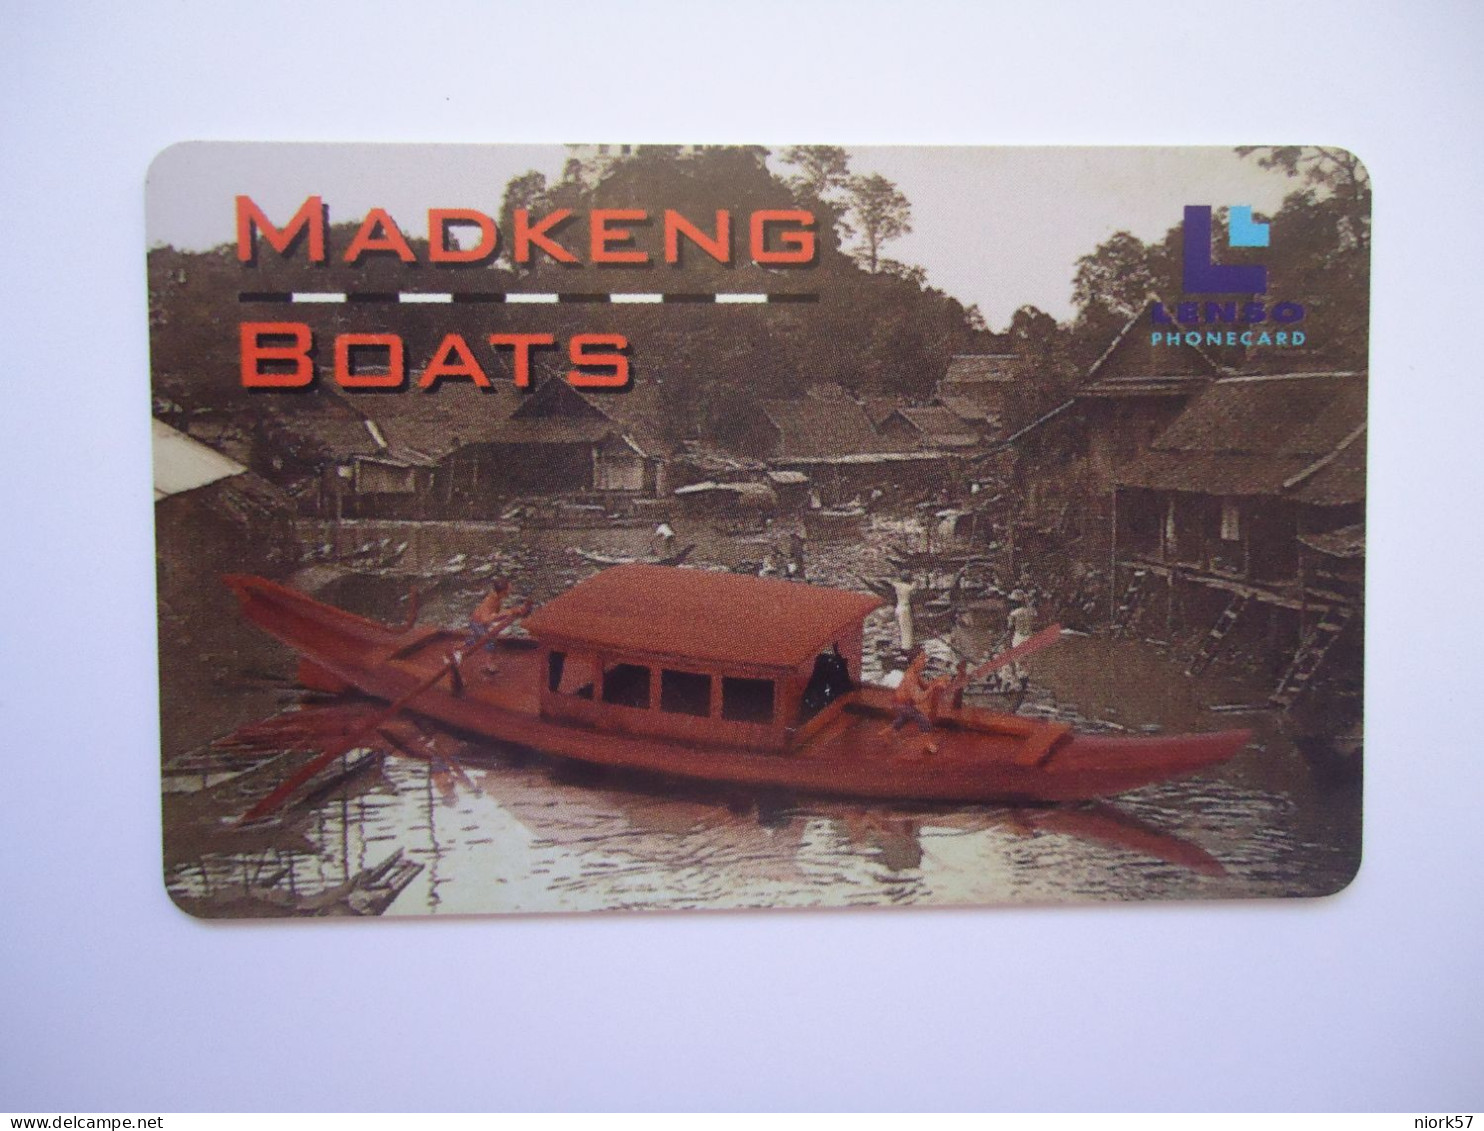 THAILAND CARDS LENSO  USED MARKET BOATS  79/500 - Bateaux